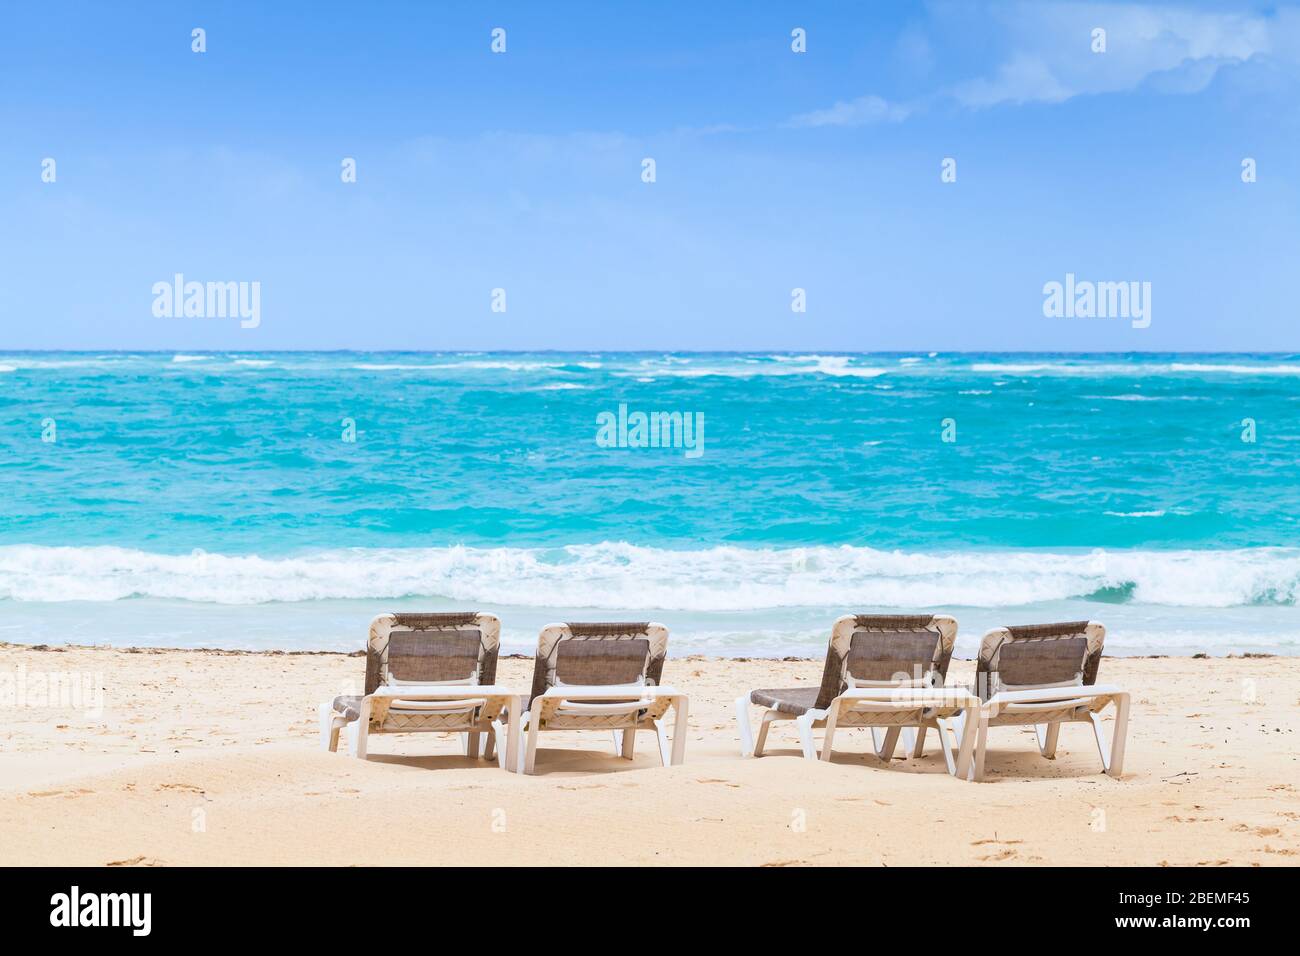 Sunloungers are on sandy beach at sunny day, Dominican Republic Stock Photo